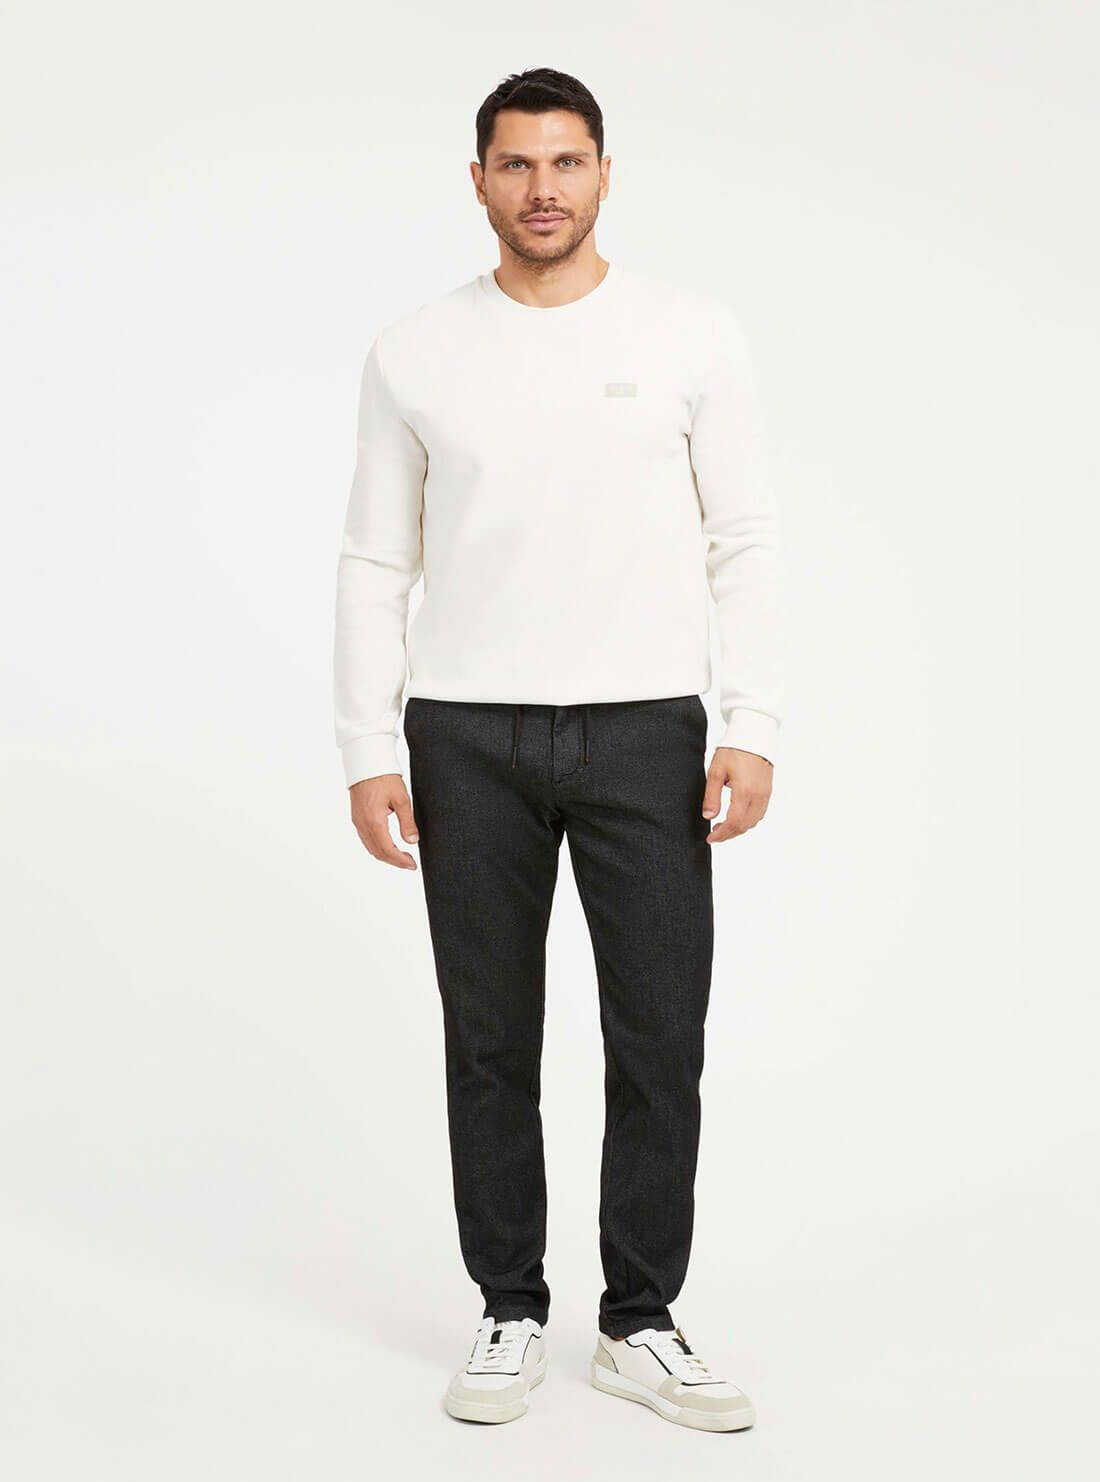 White Stretch Long Sleeve Jumper | GUESS men's apparel | full view